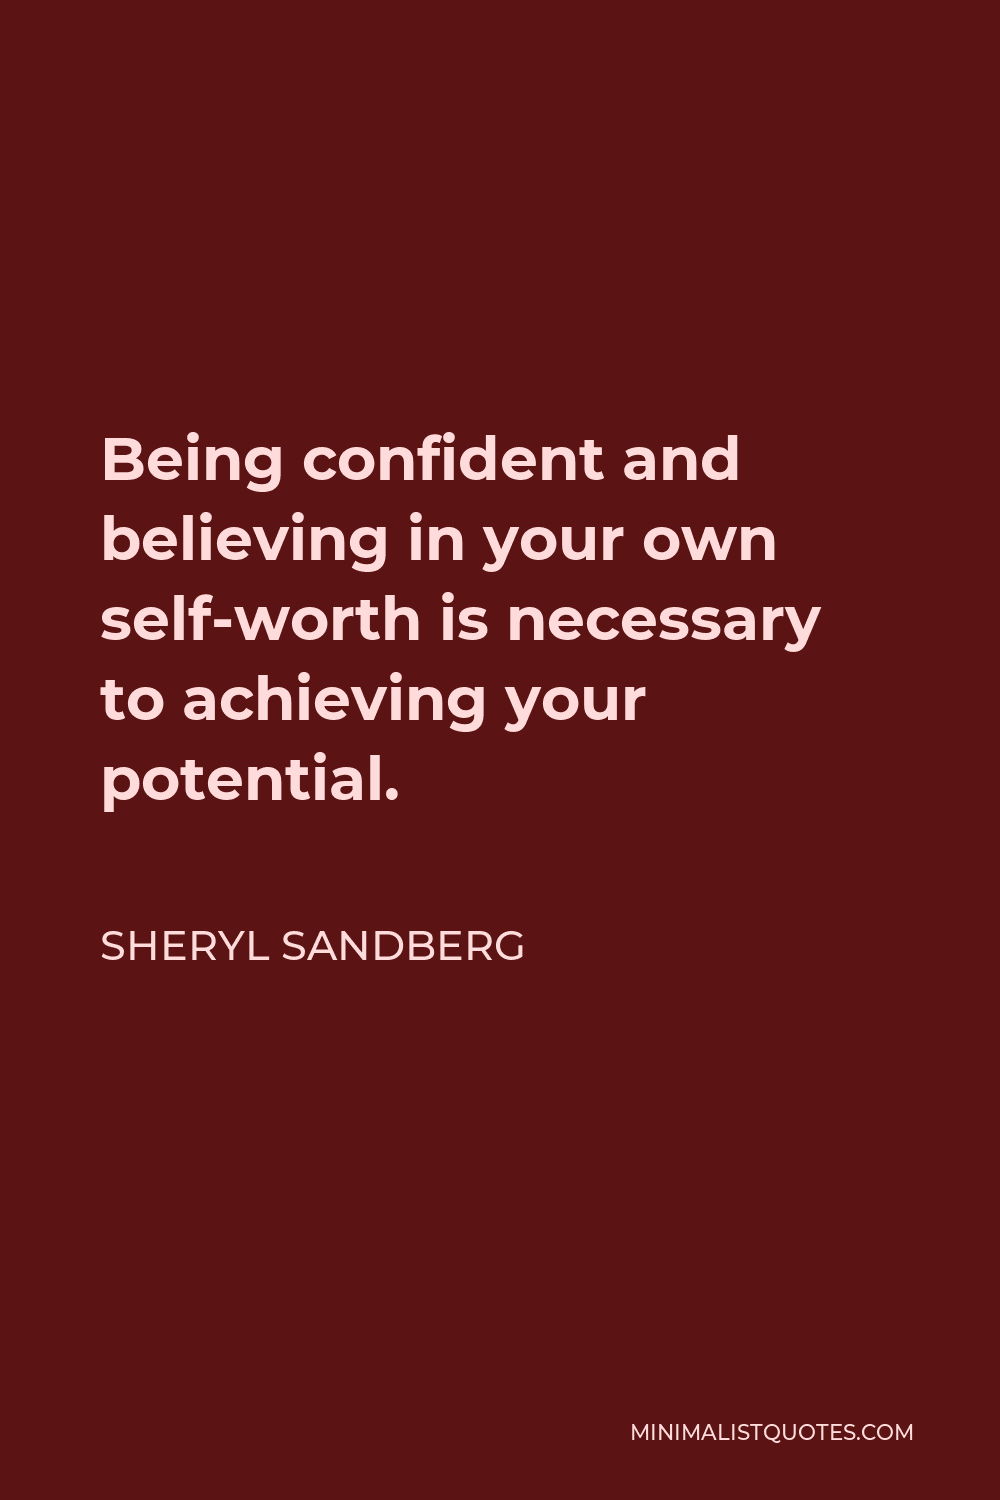 Sheryl Sandberg Quote - Being confident and believing in your own self-worth is necessary to achieving your potential.